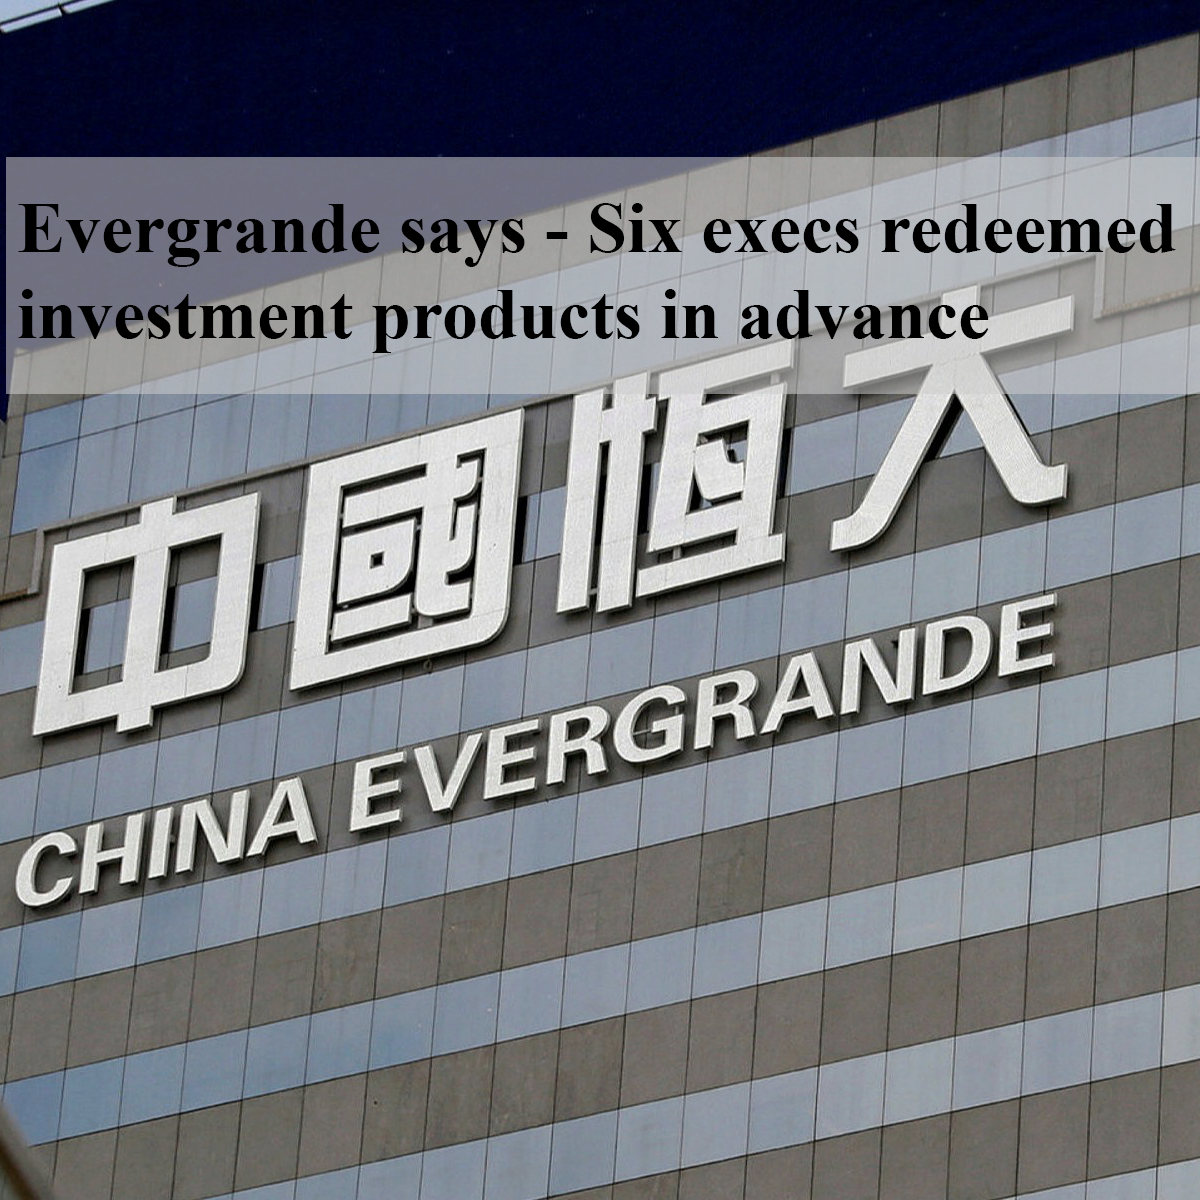 Evergrande says - Six execs redeemed investment products in advance